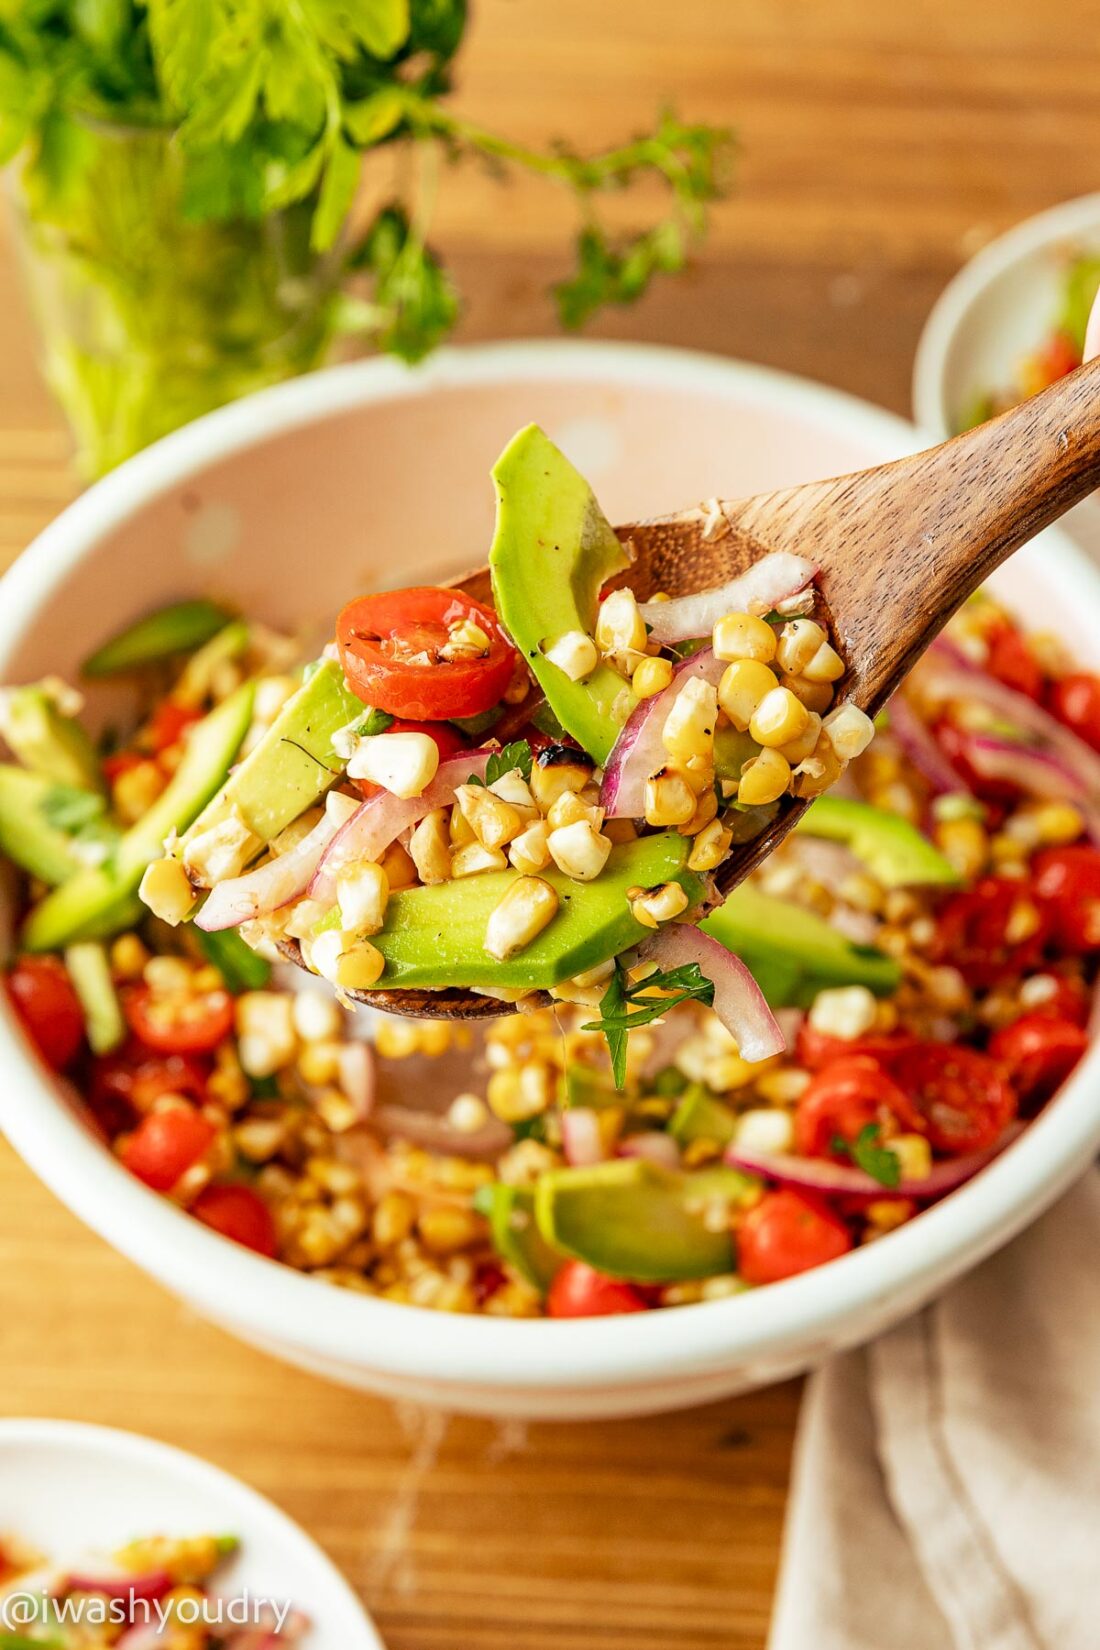 spoonful of salad with corn and avocado with tomatoes.